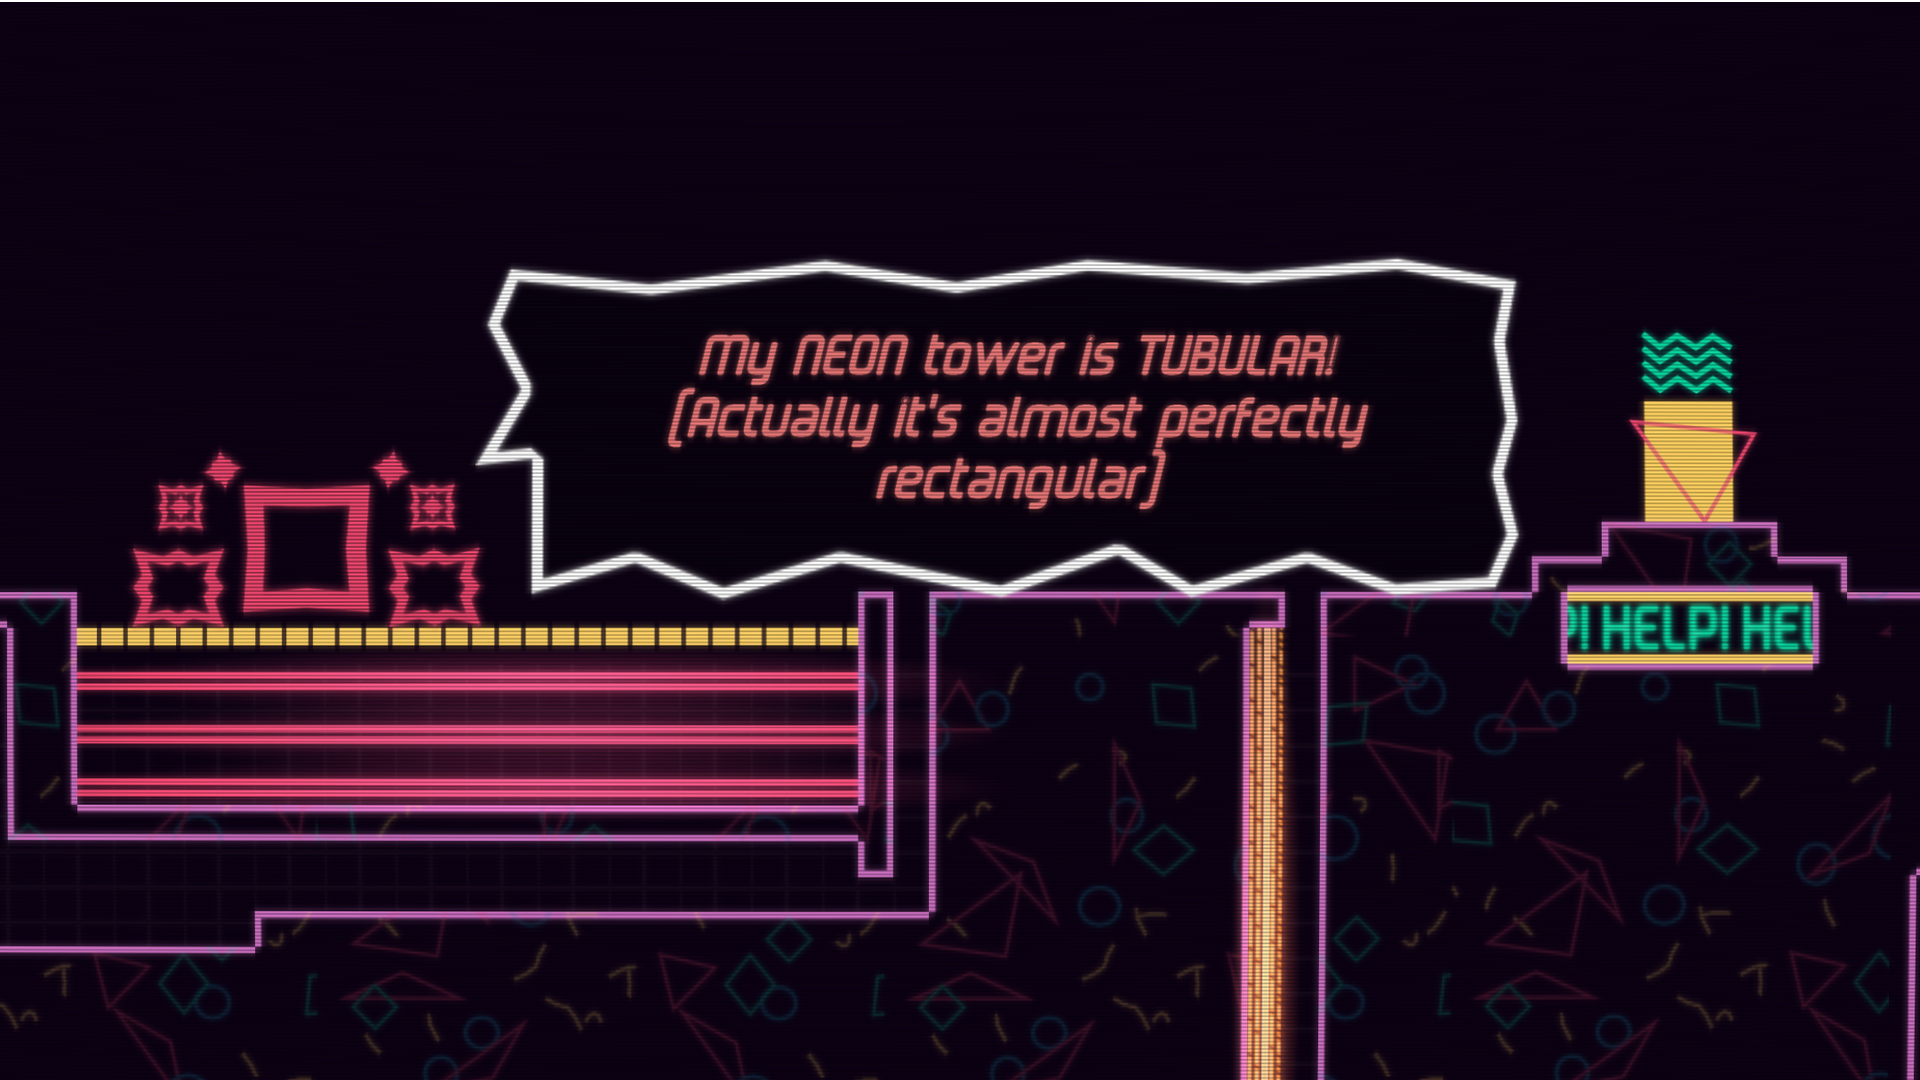 Big Tower Tiny Square - Play it Online at Coolmath Games